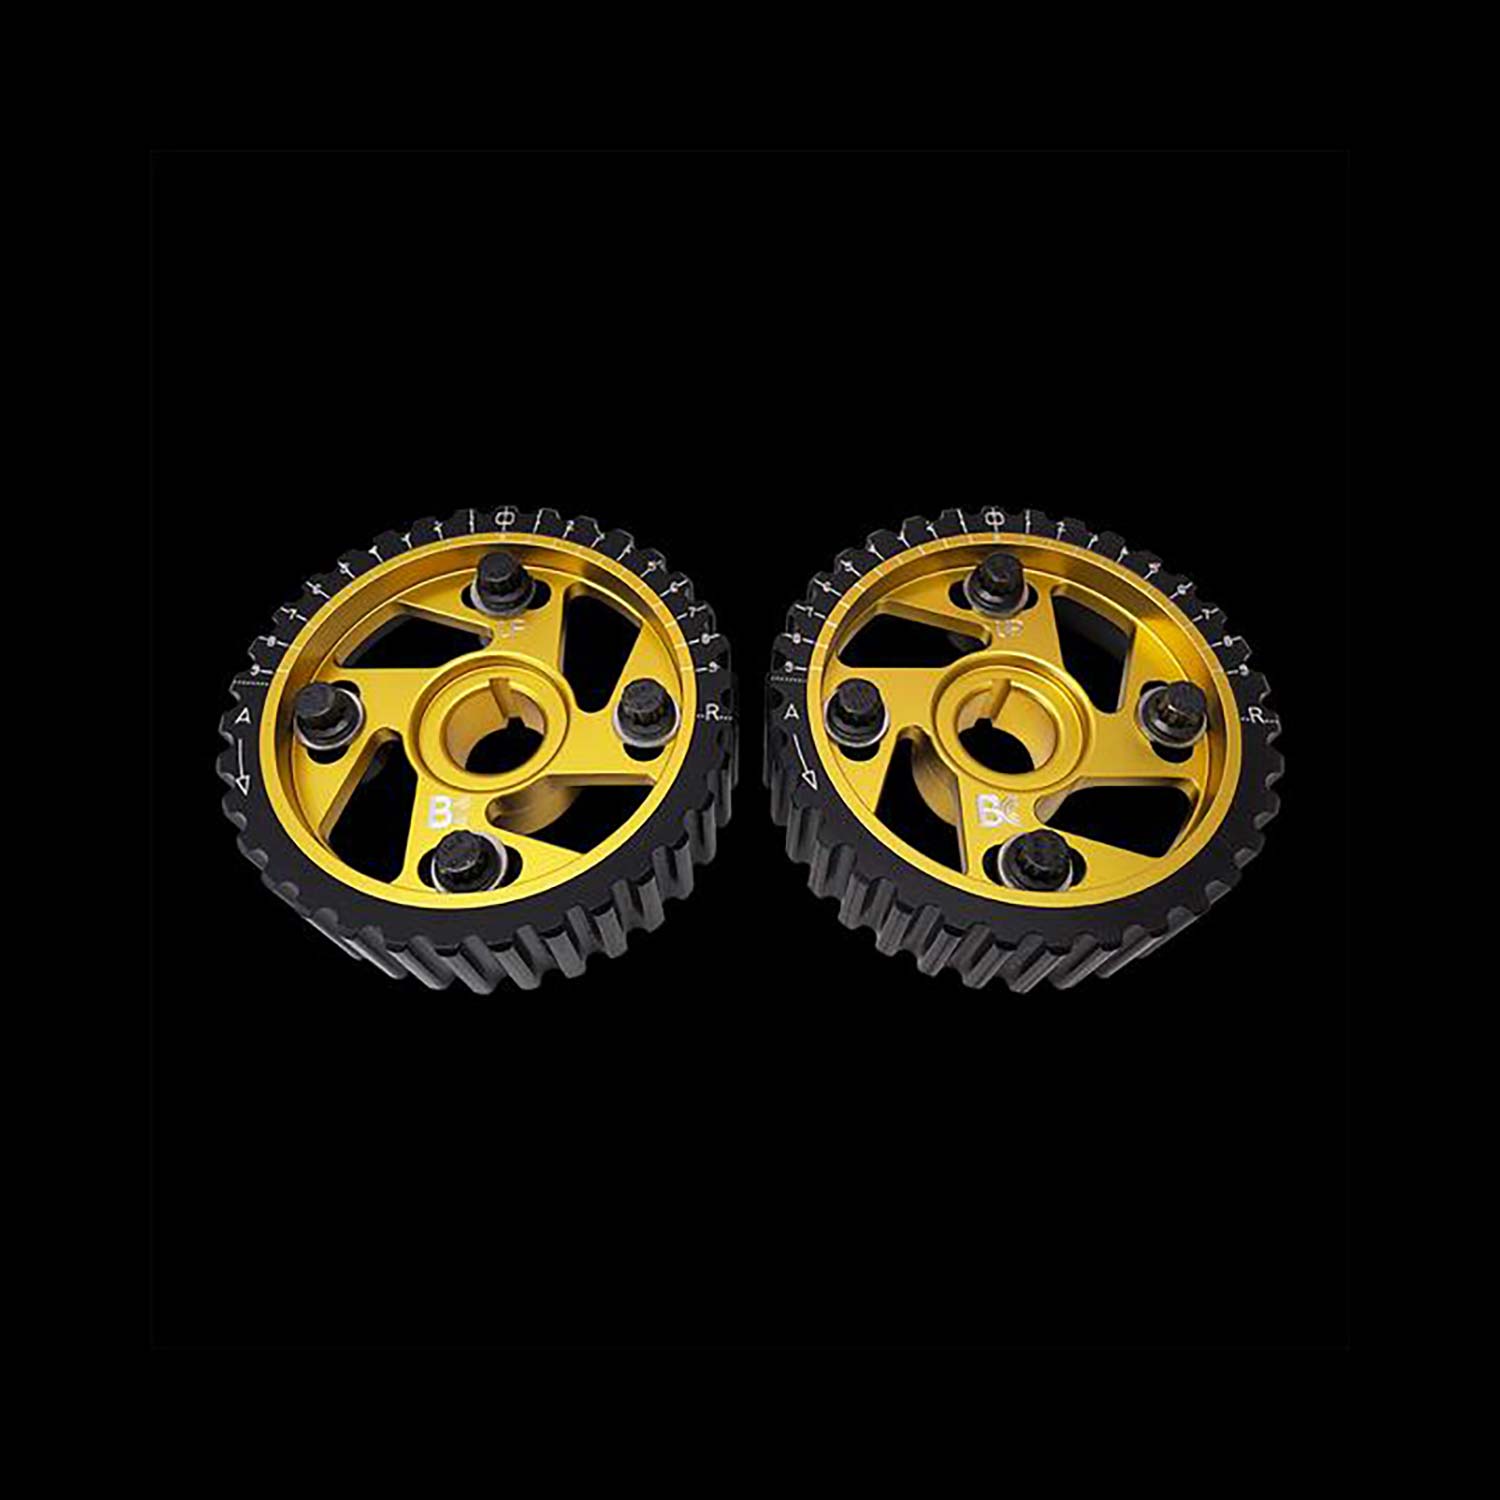 Two New Adjustable Billet Racing Gold Cam Gear For Honda & Acura B Series